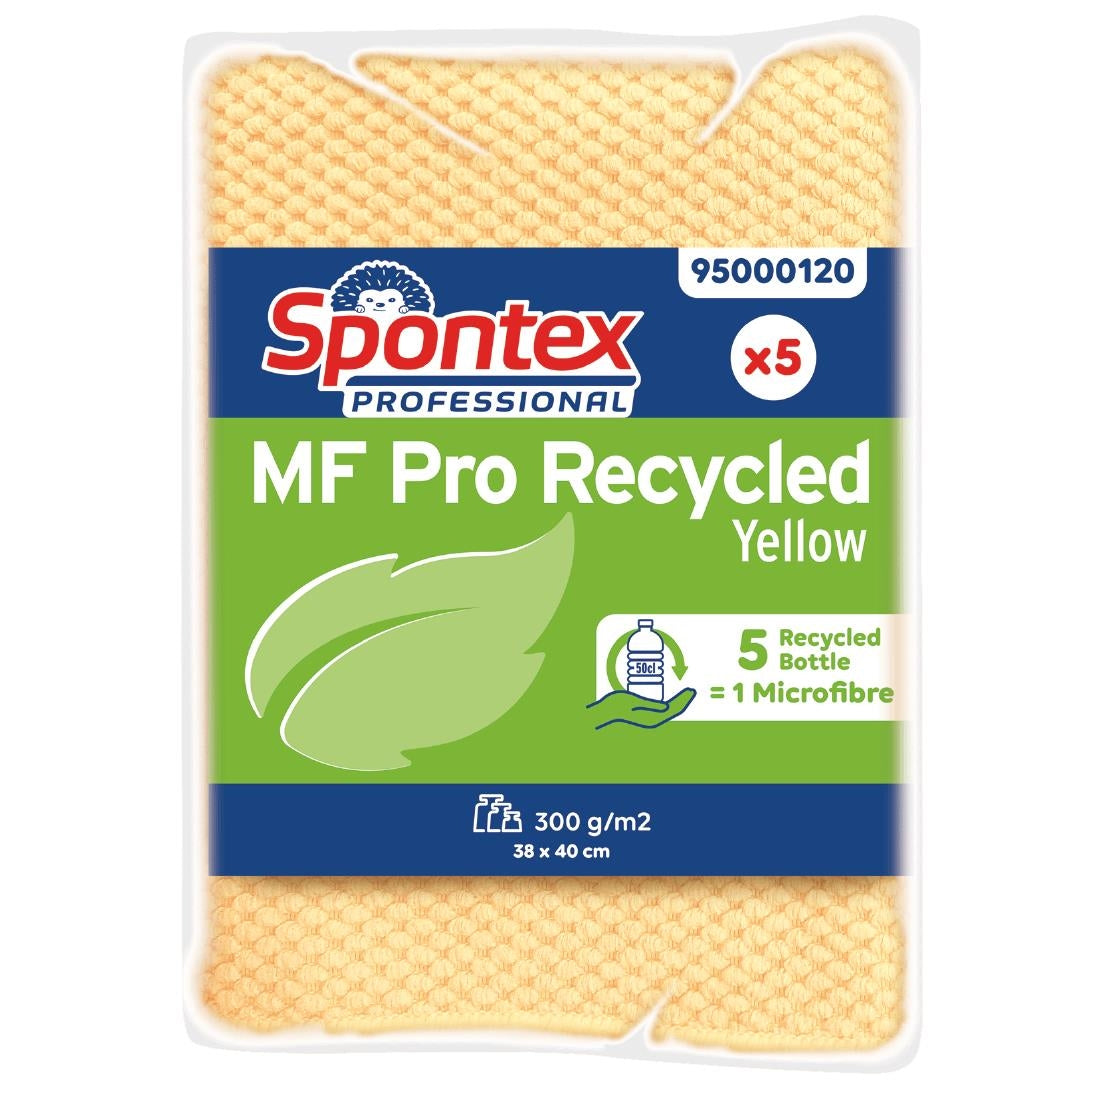 FT635 Spontex MF Pro Recycled Microfibre Cloth Yellow (pk5) JD Catering Equipment Solutions Ltd